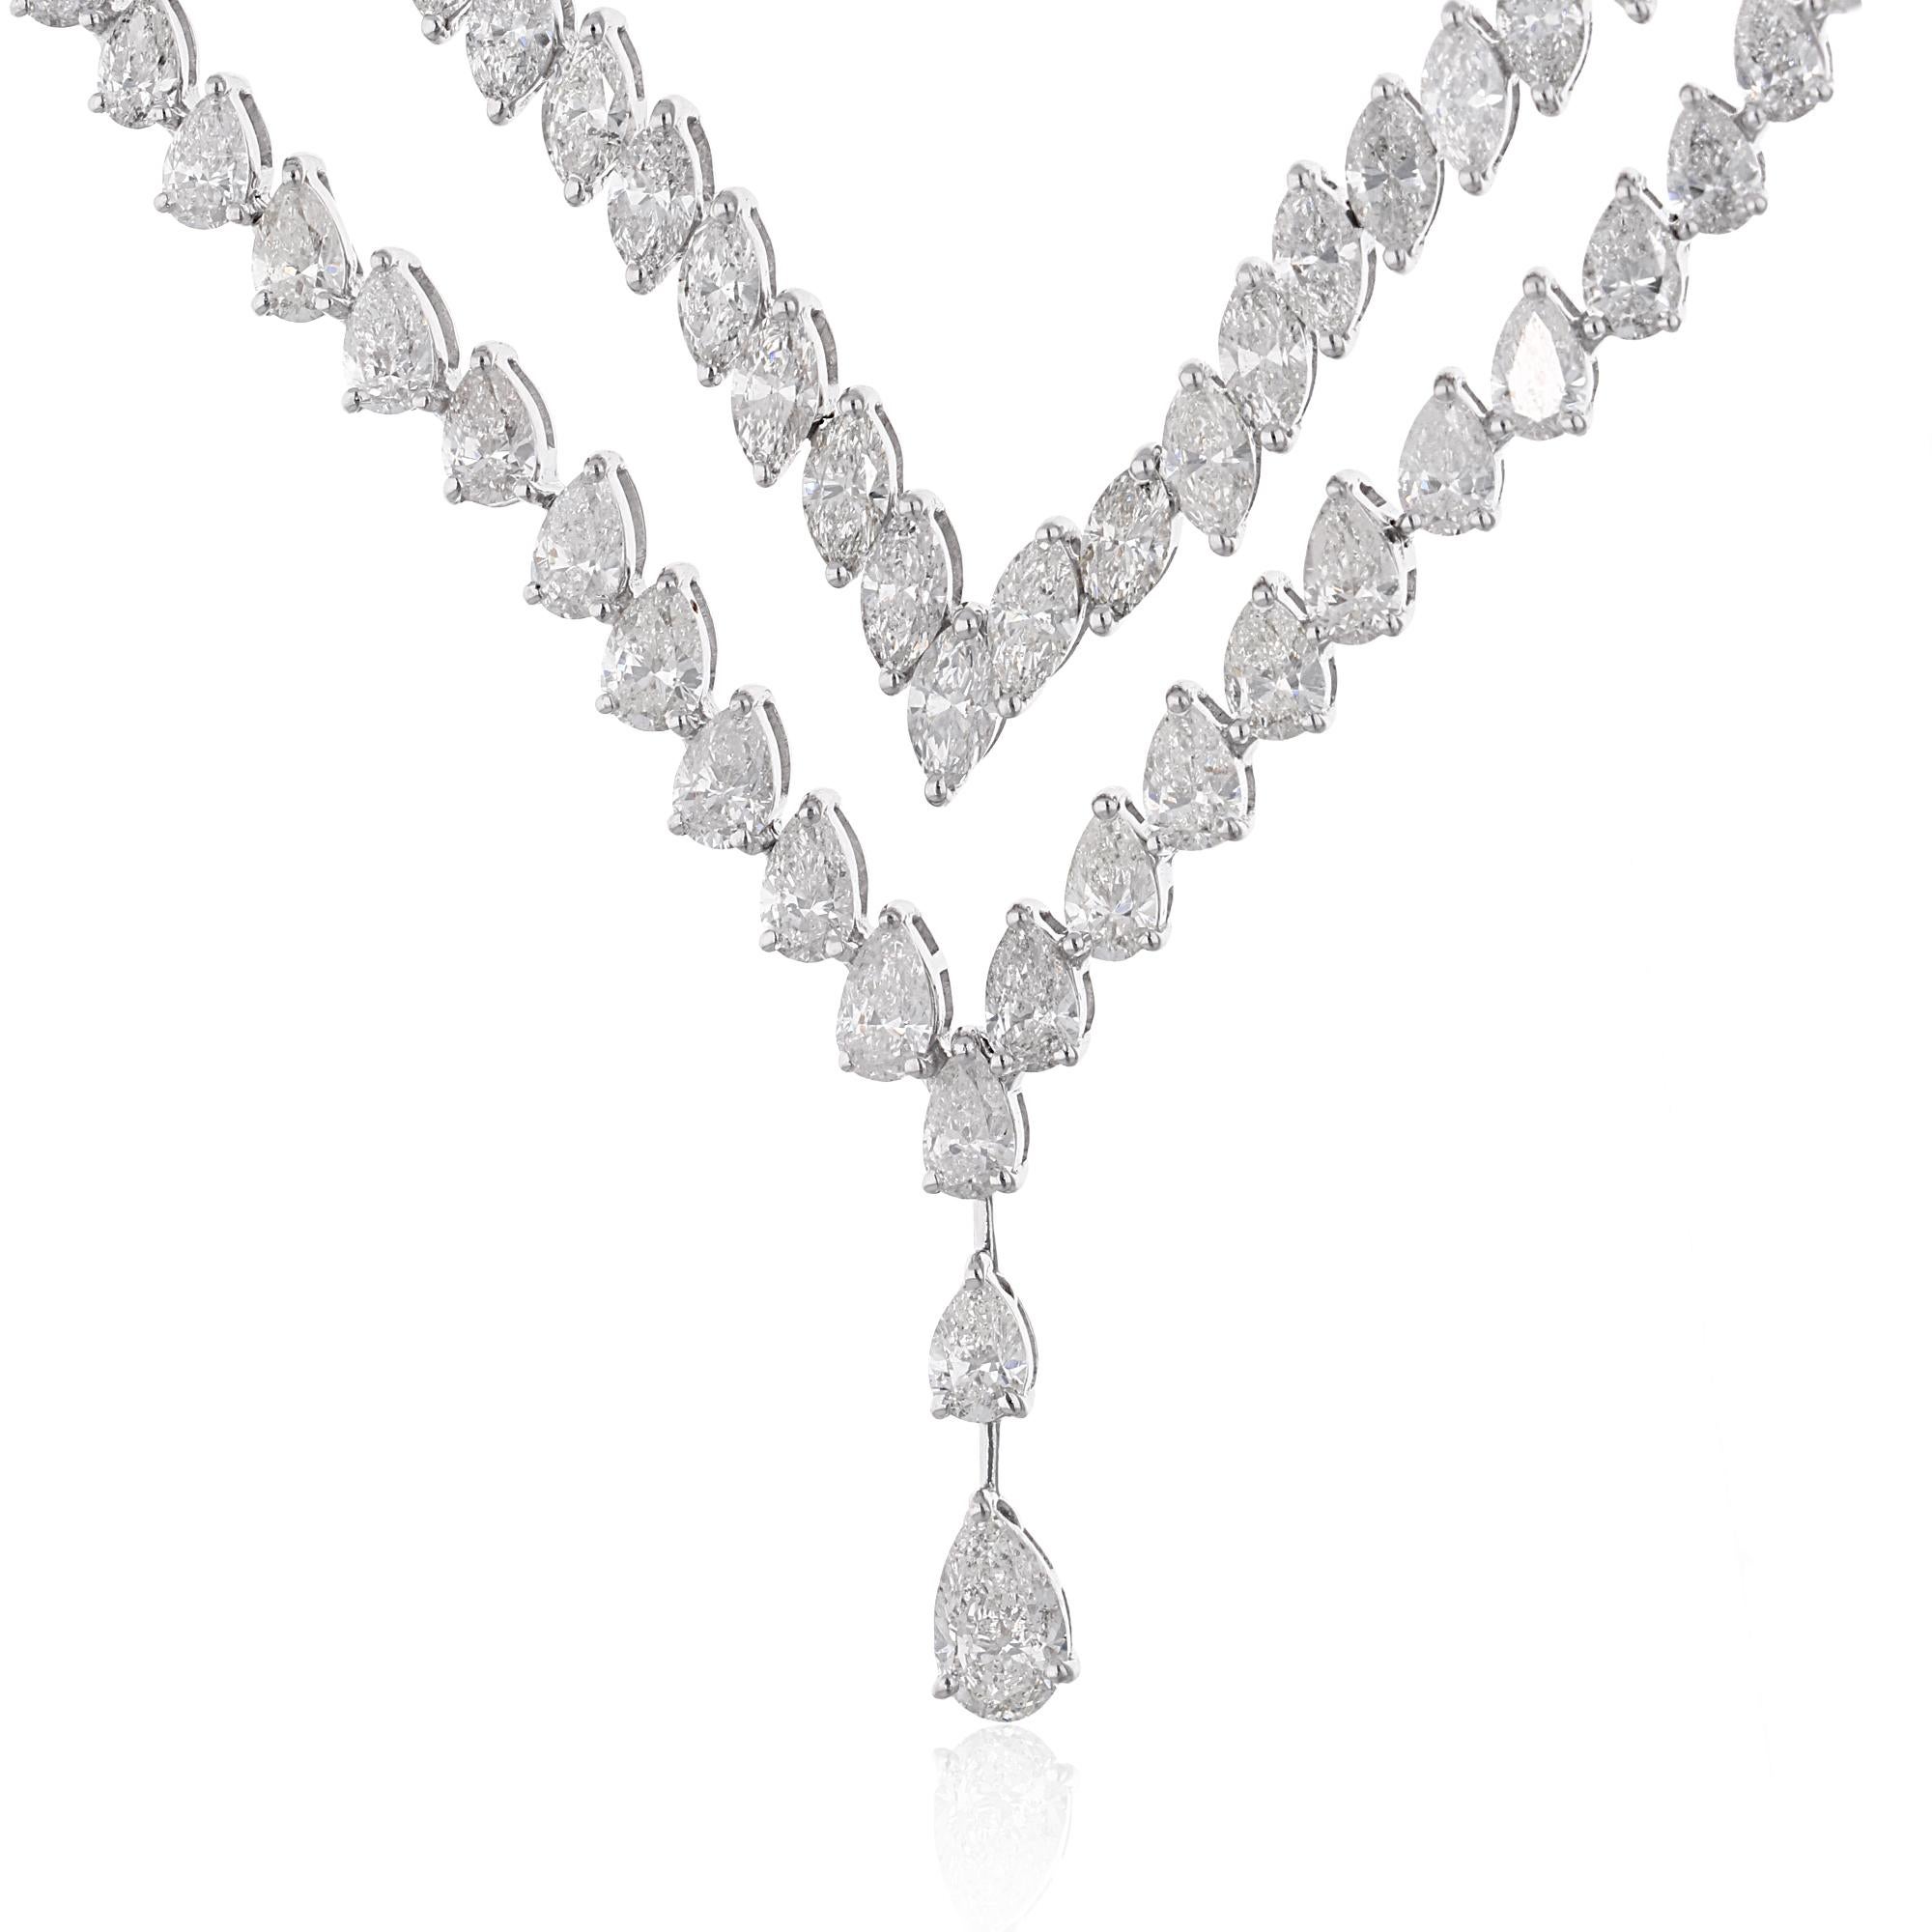 Experience the ultimate in luxury and elegance with this breathtaking 20 Carat Marquise Pear Diamond Necklace. Meticulously crafted in 18 Karat White Gold, this exquisite piece of fine jewelry is designed to captivate and leave a lasting